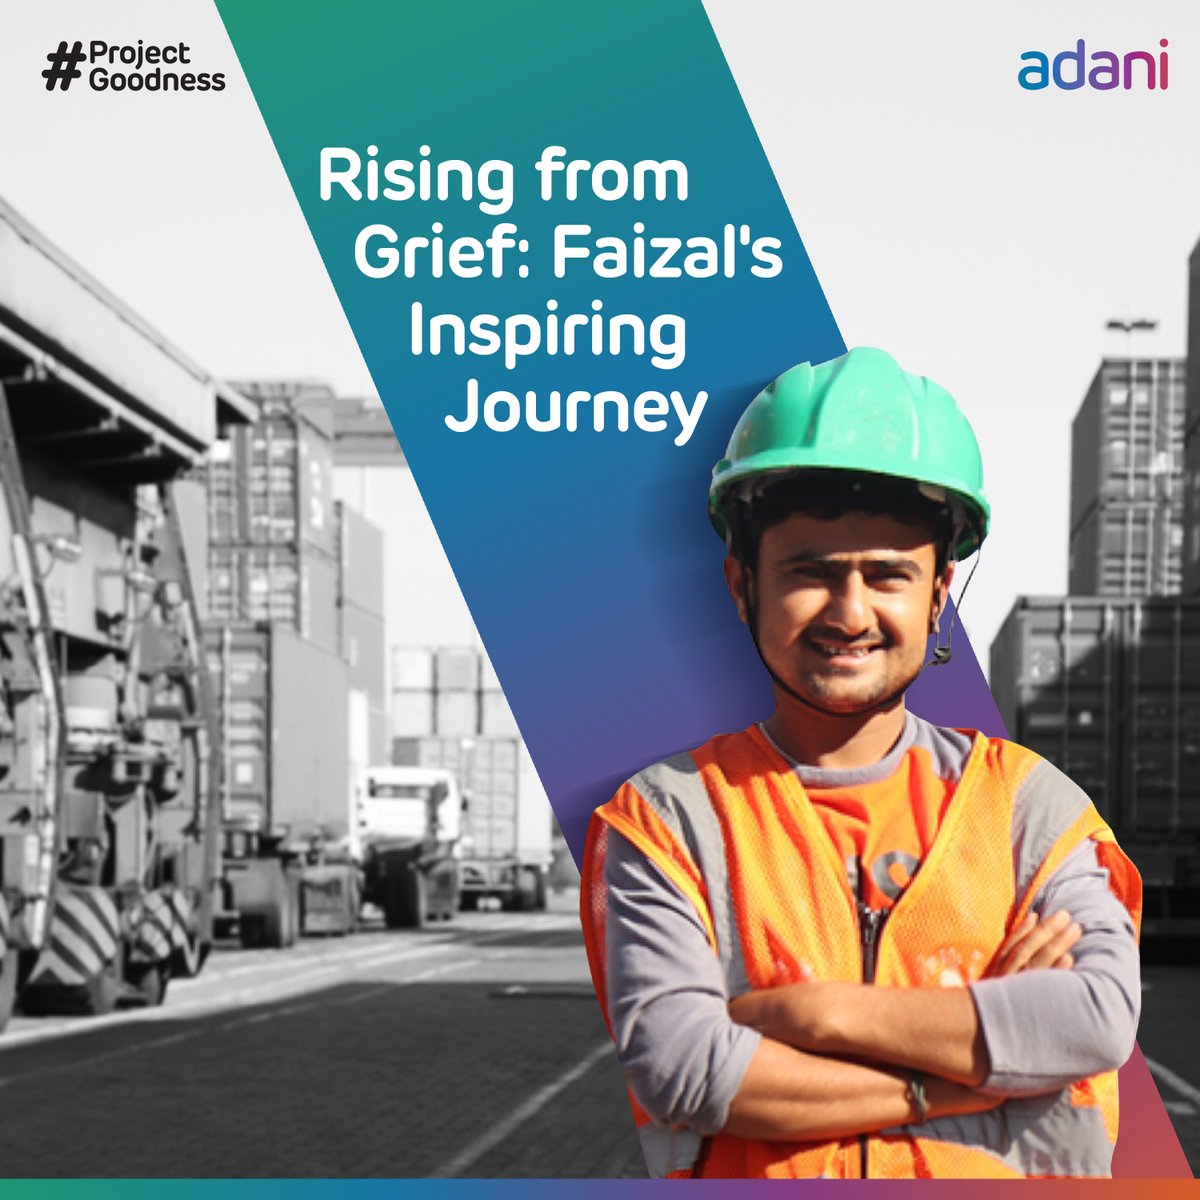 Faizal, a Crane Operator at #AdaniPort, aspires to be a Logistics Supervisor. His life transformed through an @AdaniFoundation vocational course. Lost his father early but not hope. His journey is a testament to the power of #education. 
#ProjectGoodness